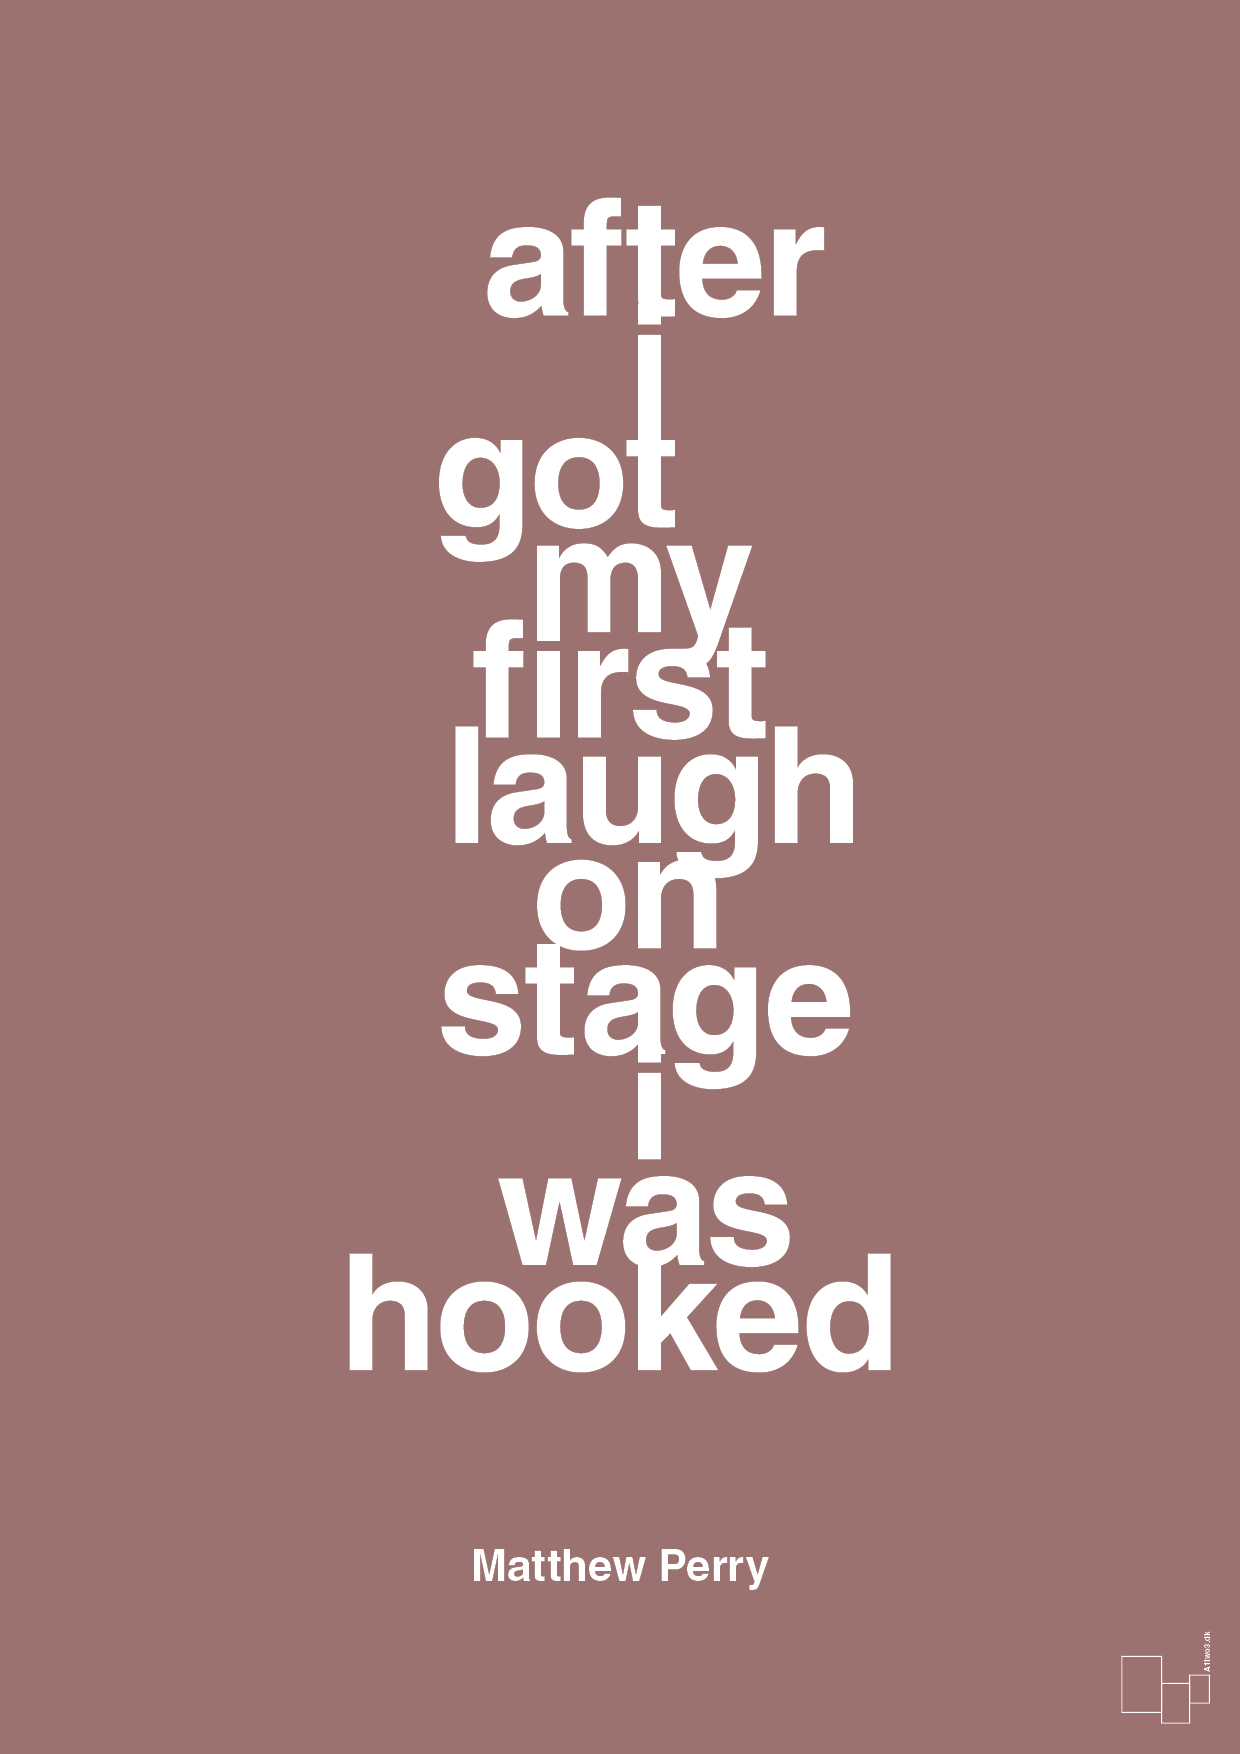 after i got my first laugh on stage i was hooked - Plakat med Citater i Plum